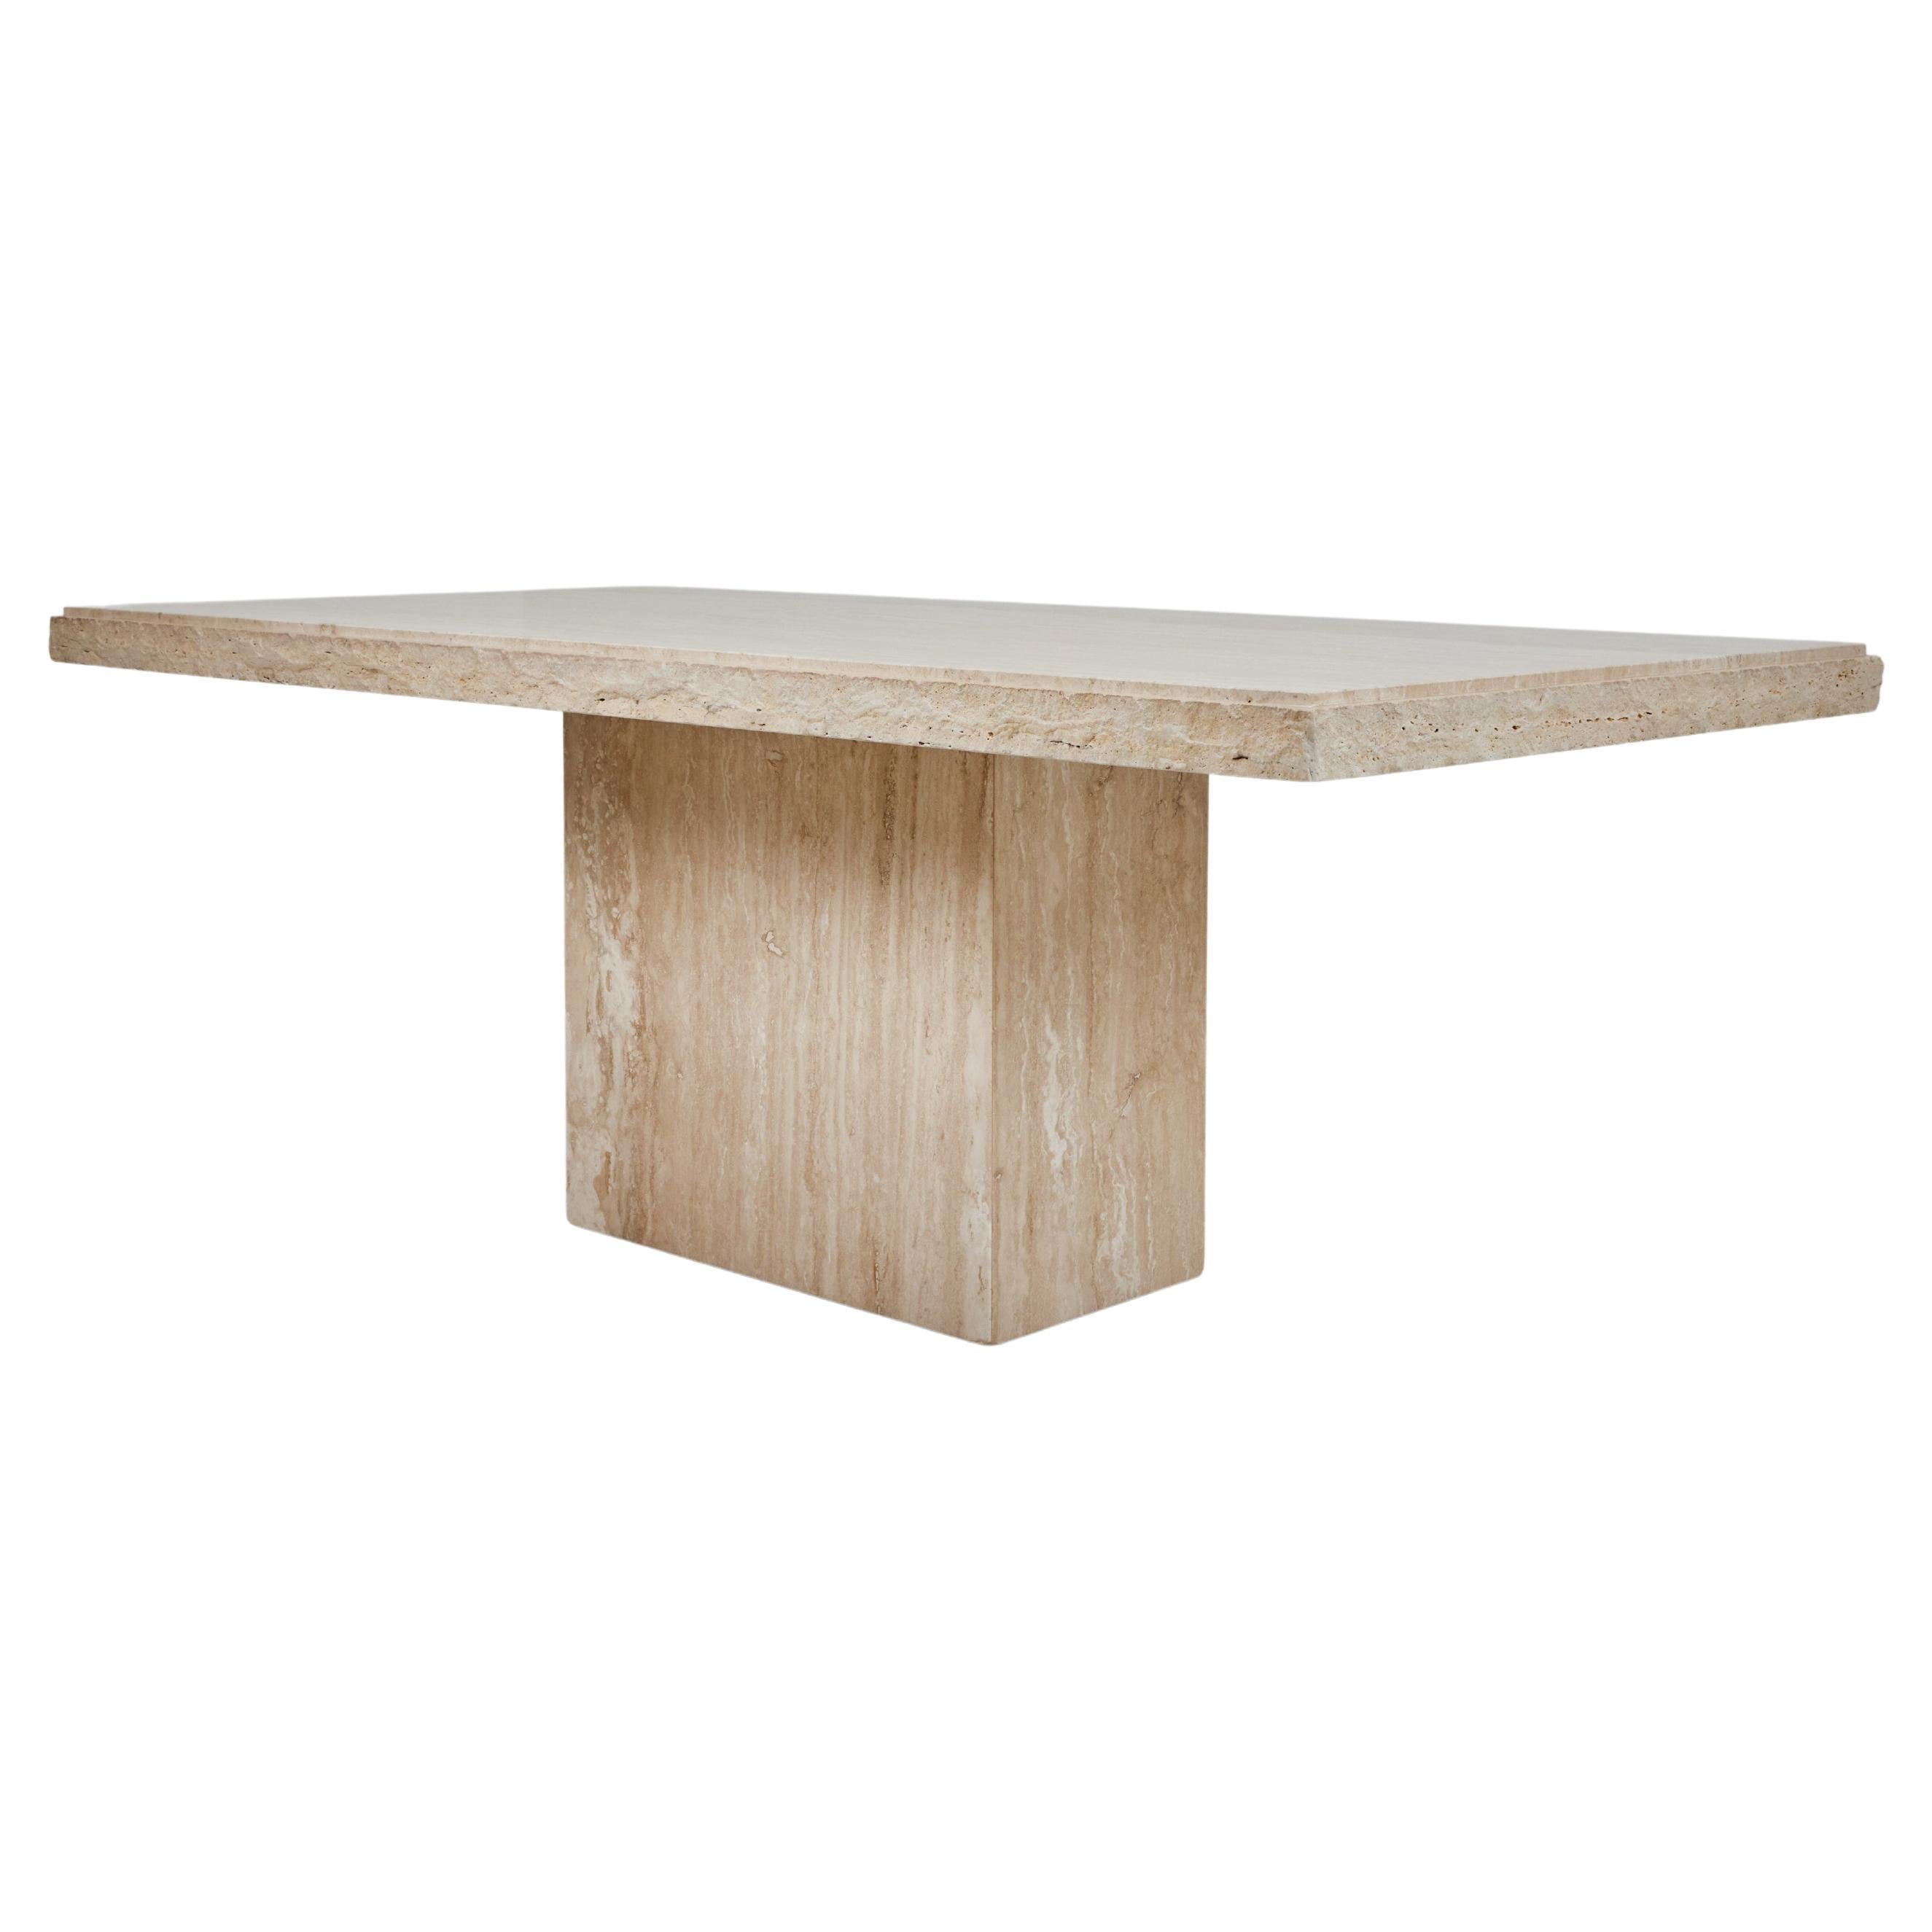 A Roman Travertine Dining Table with a Quarry Edge For Sale